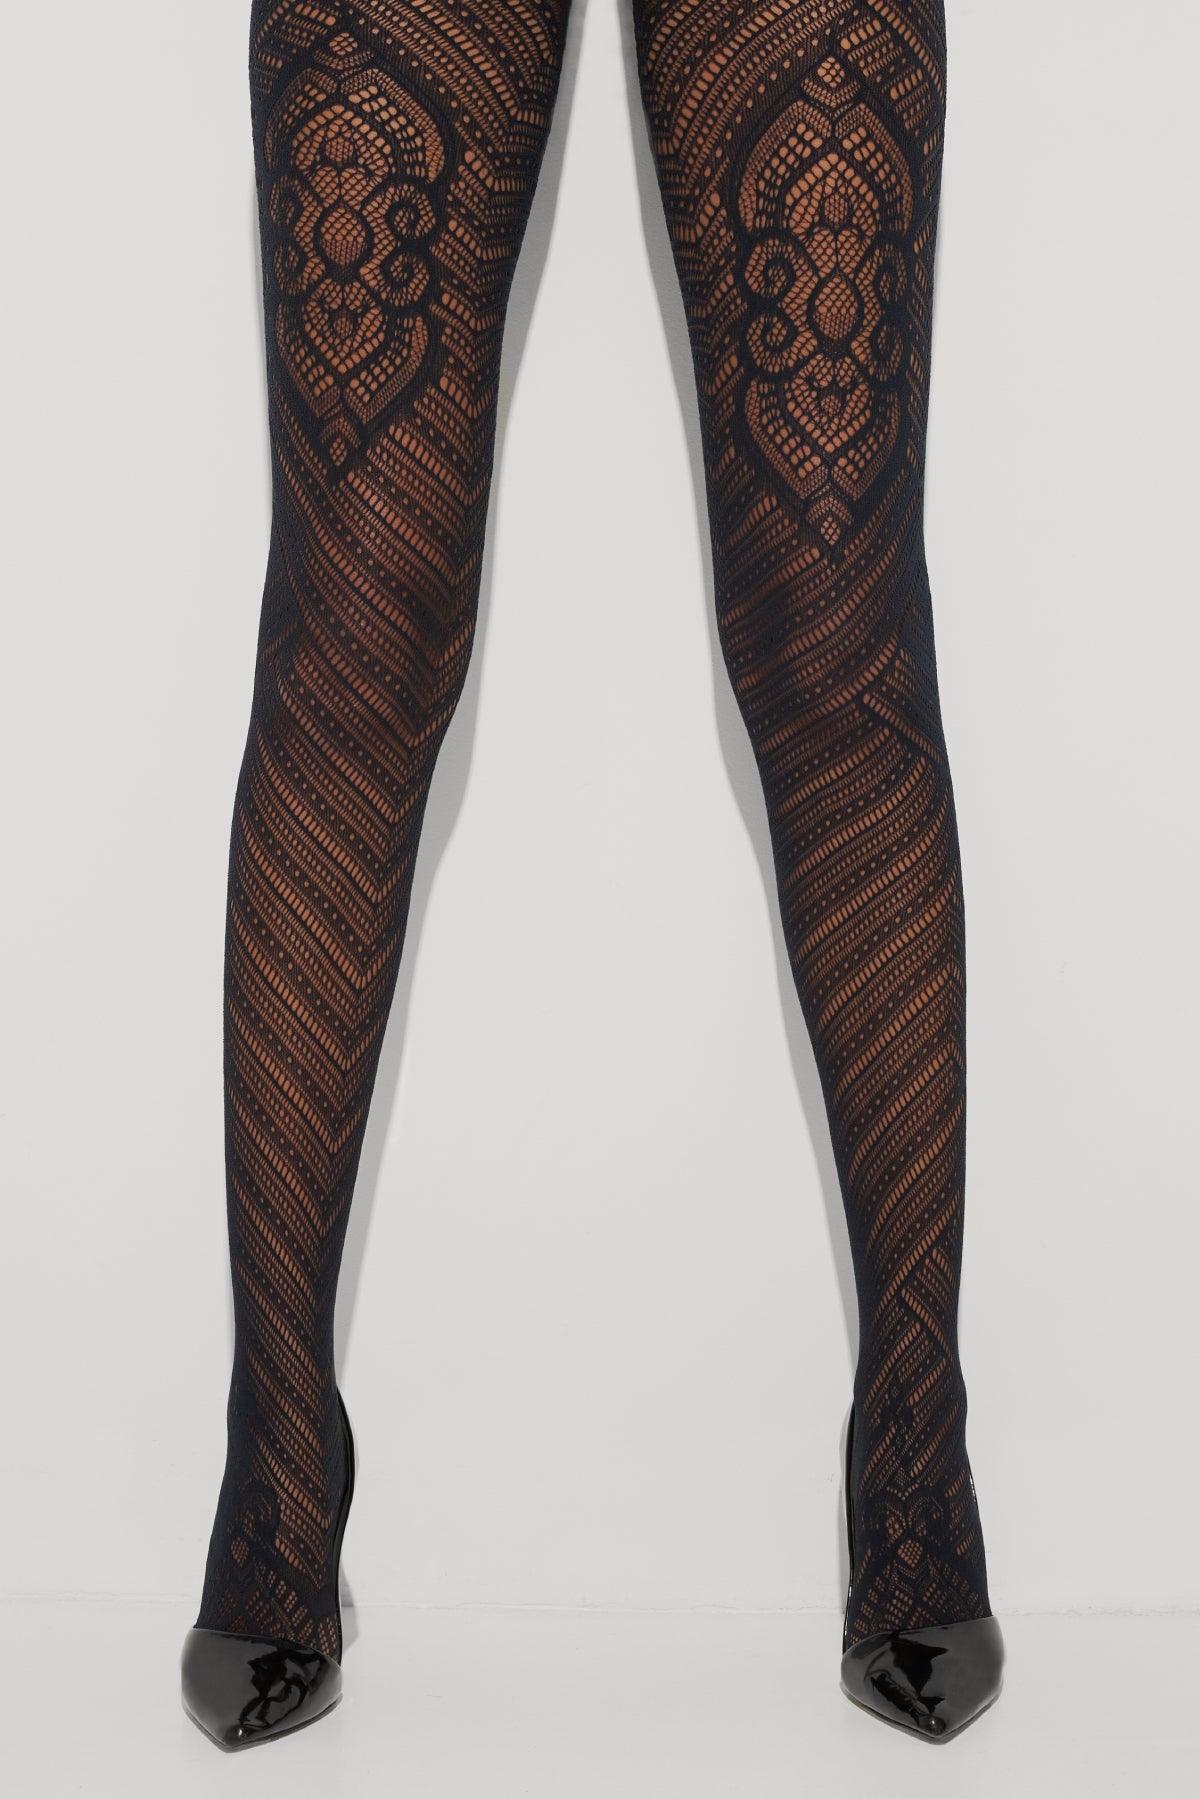 Women's black fishnet tights with bohemian lace flowers Dim Style